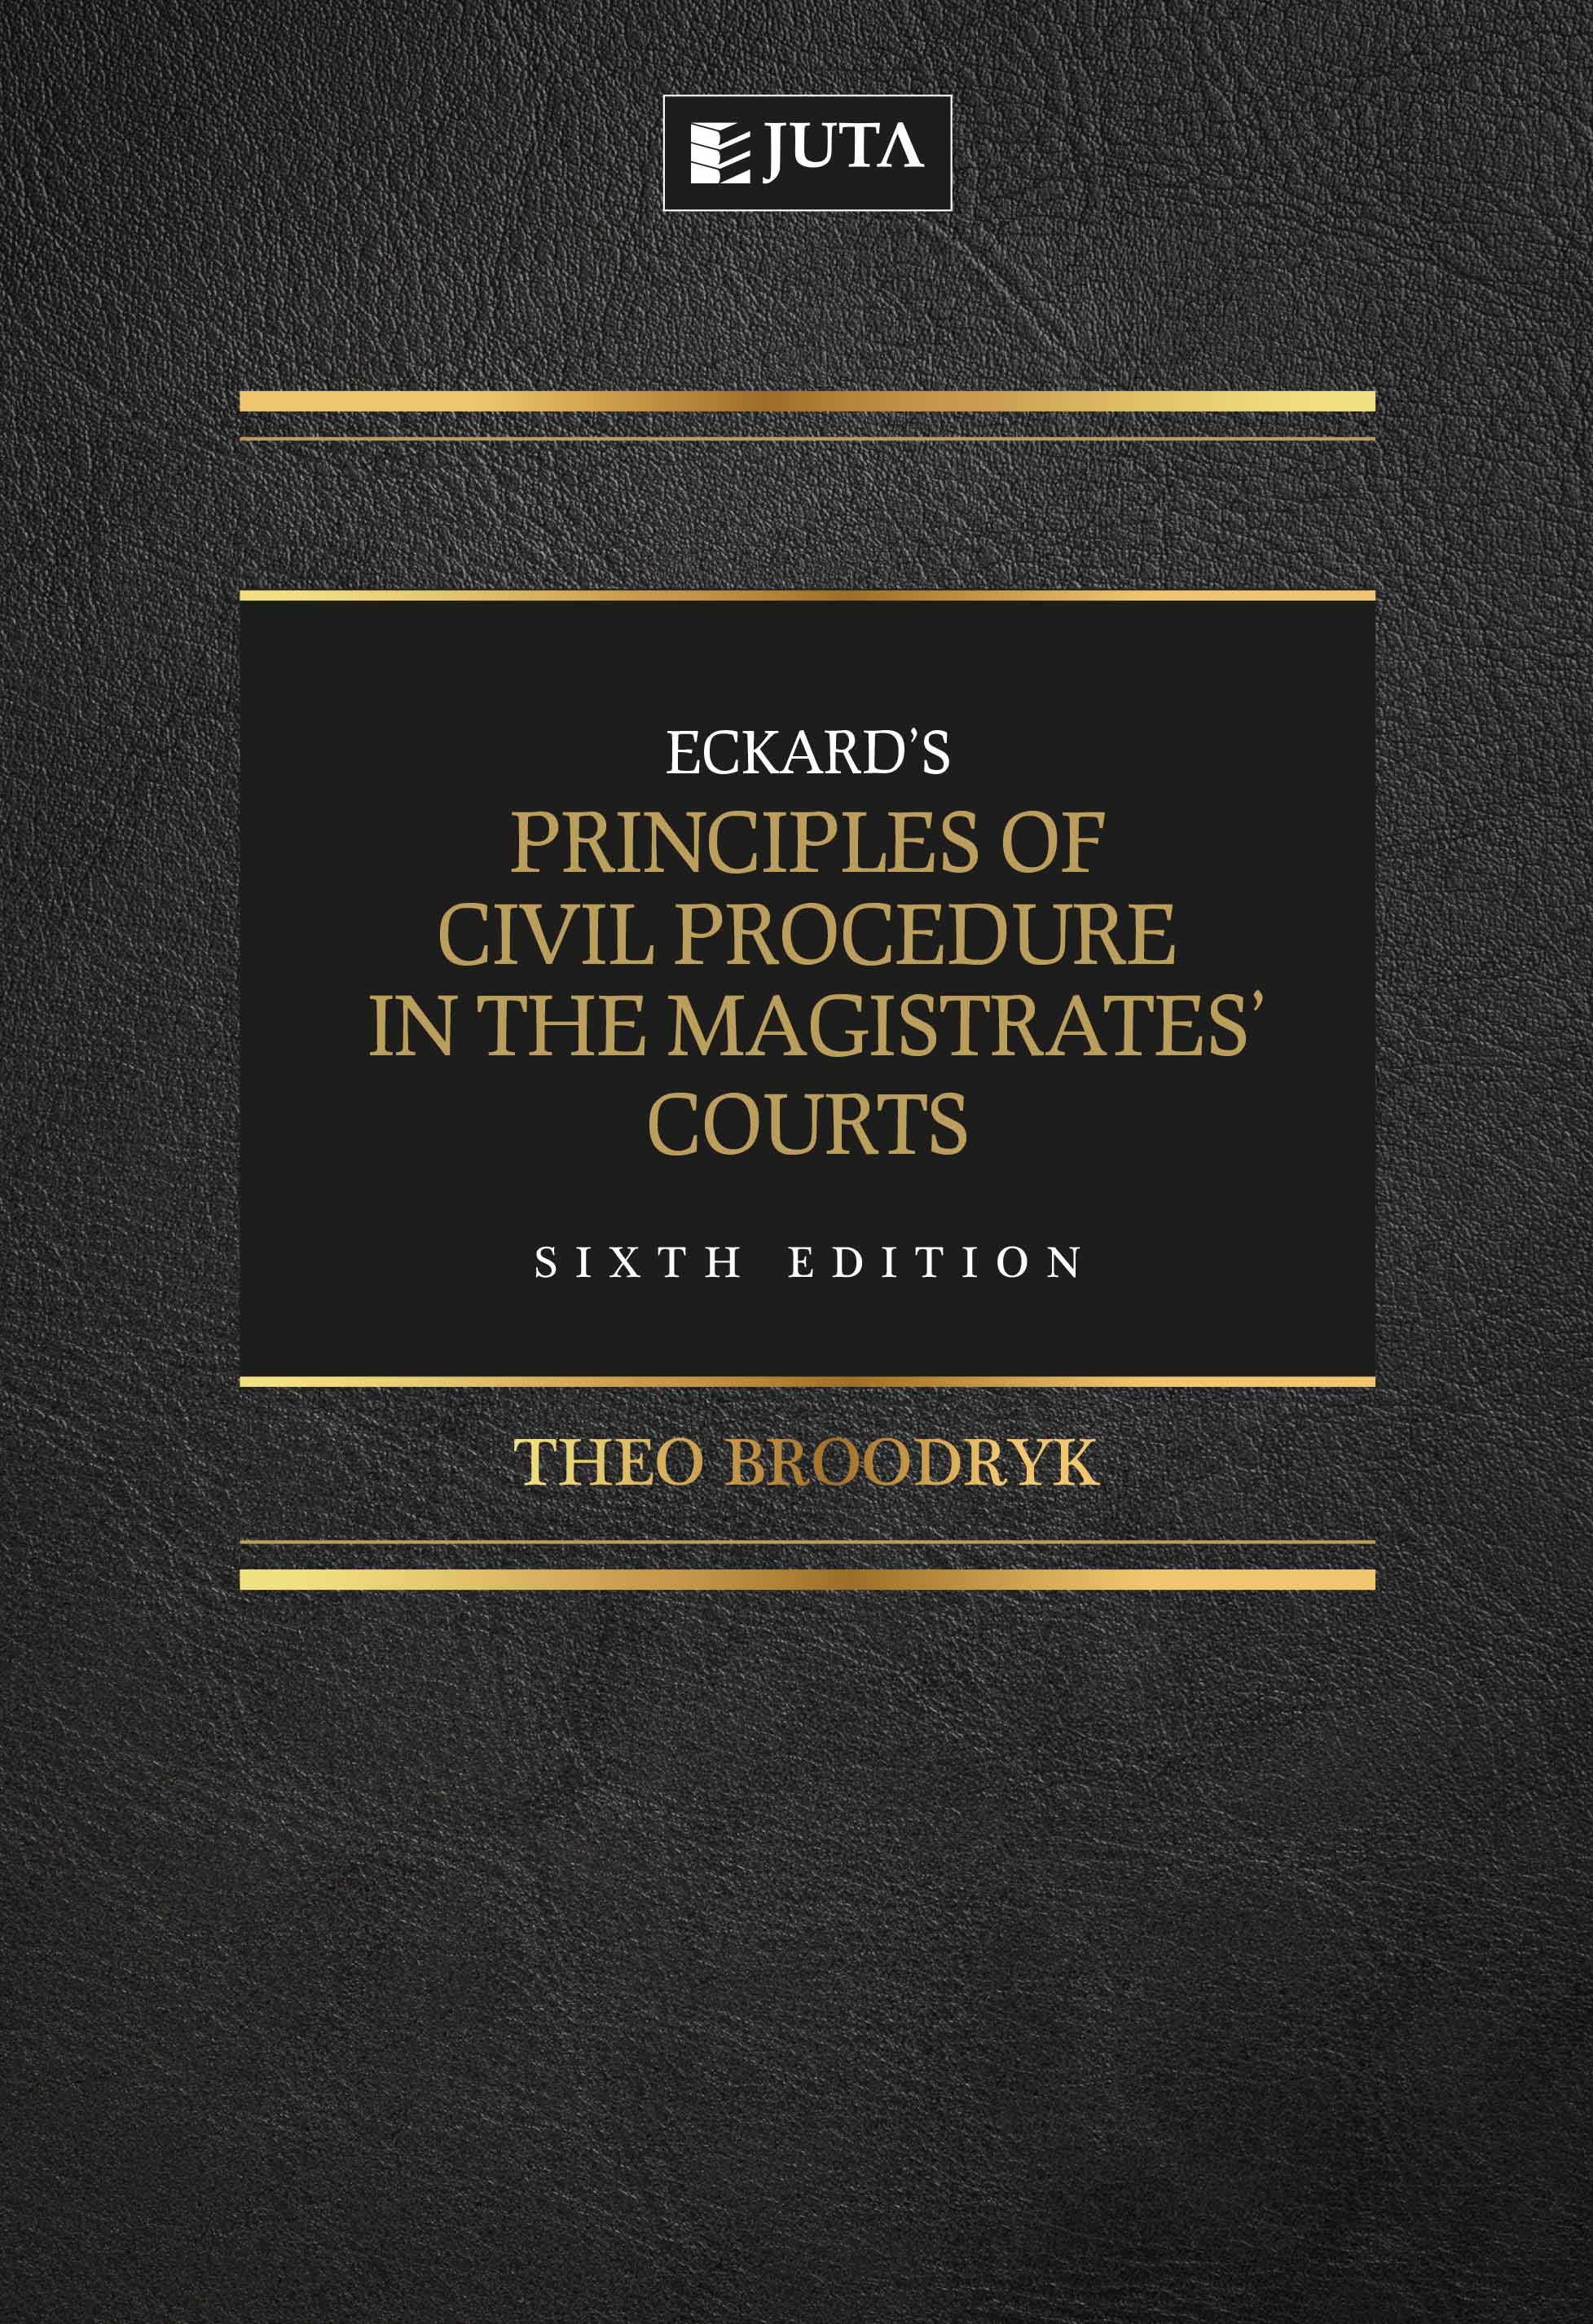 Eckard’s Principles of Civil Procedure in the Magistrates’ Courts